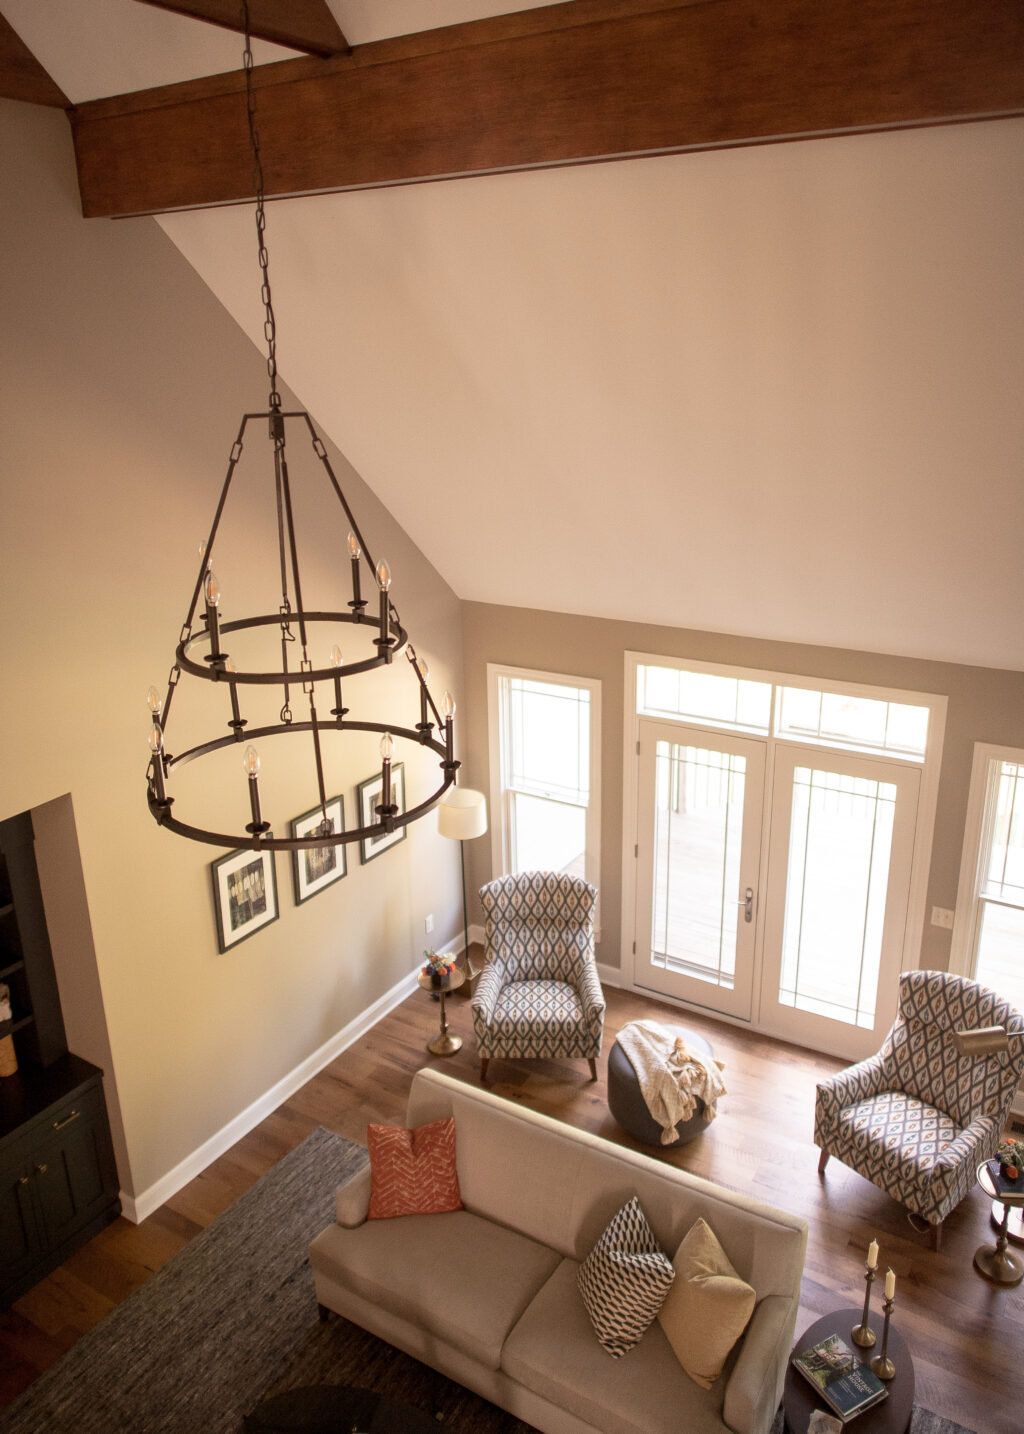 Bird's eye of a living room with black chandelier, couch, and two arm chairs